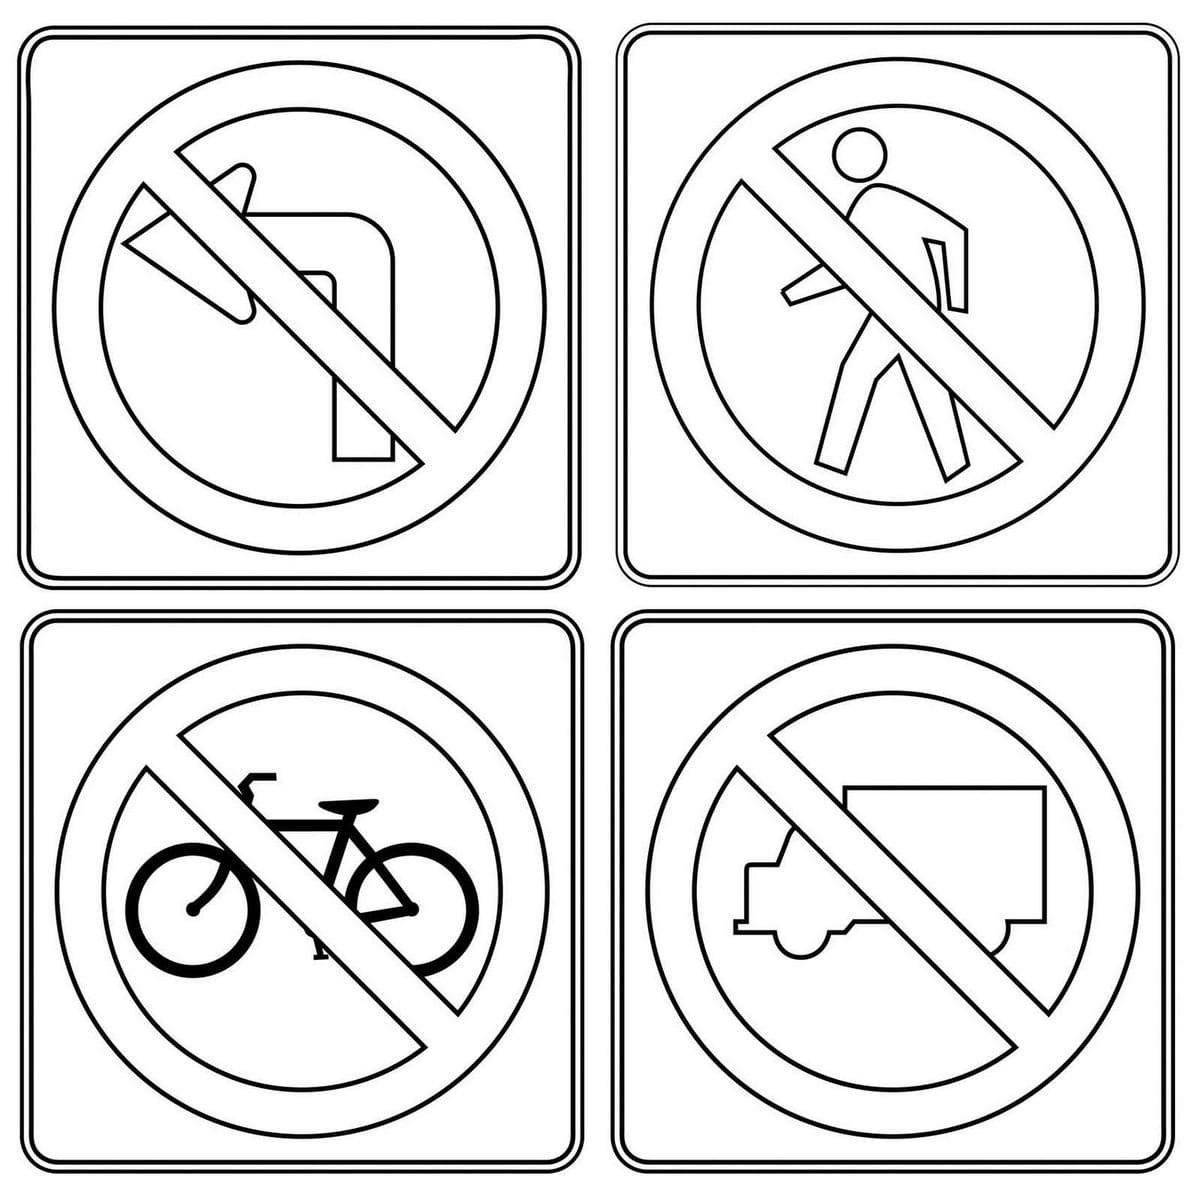 Coloring book bold fire safety signs